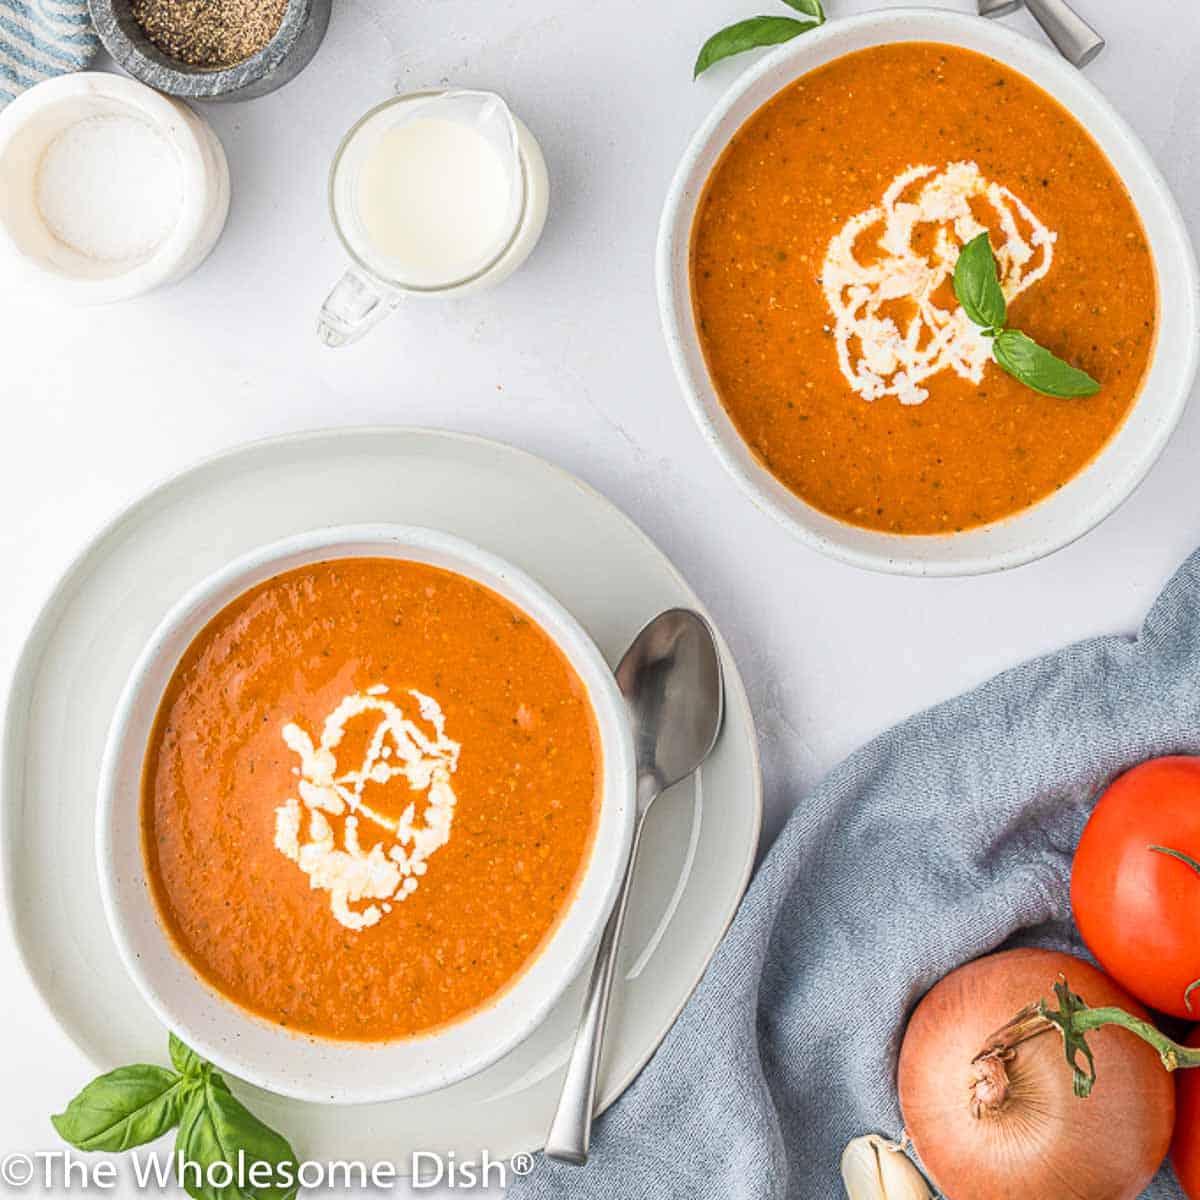 Homemade Tomato Soup - The Wholesome Dish